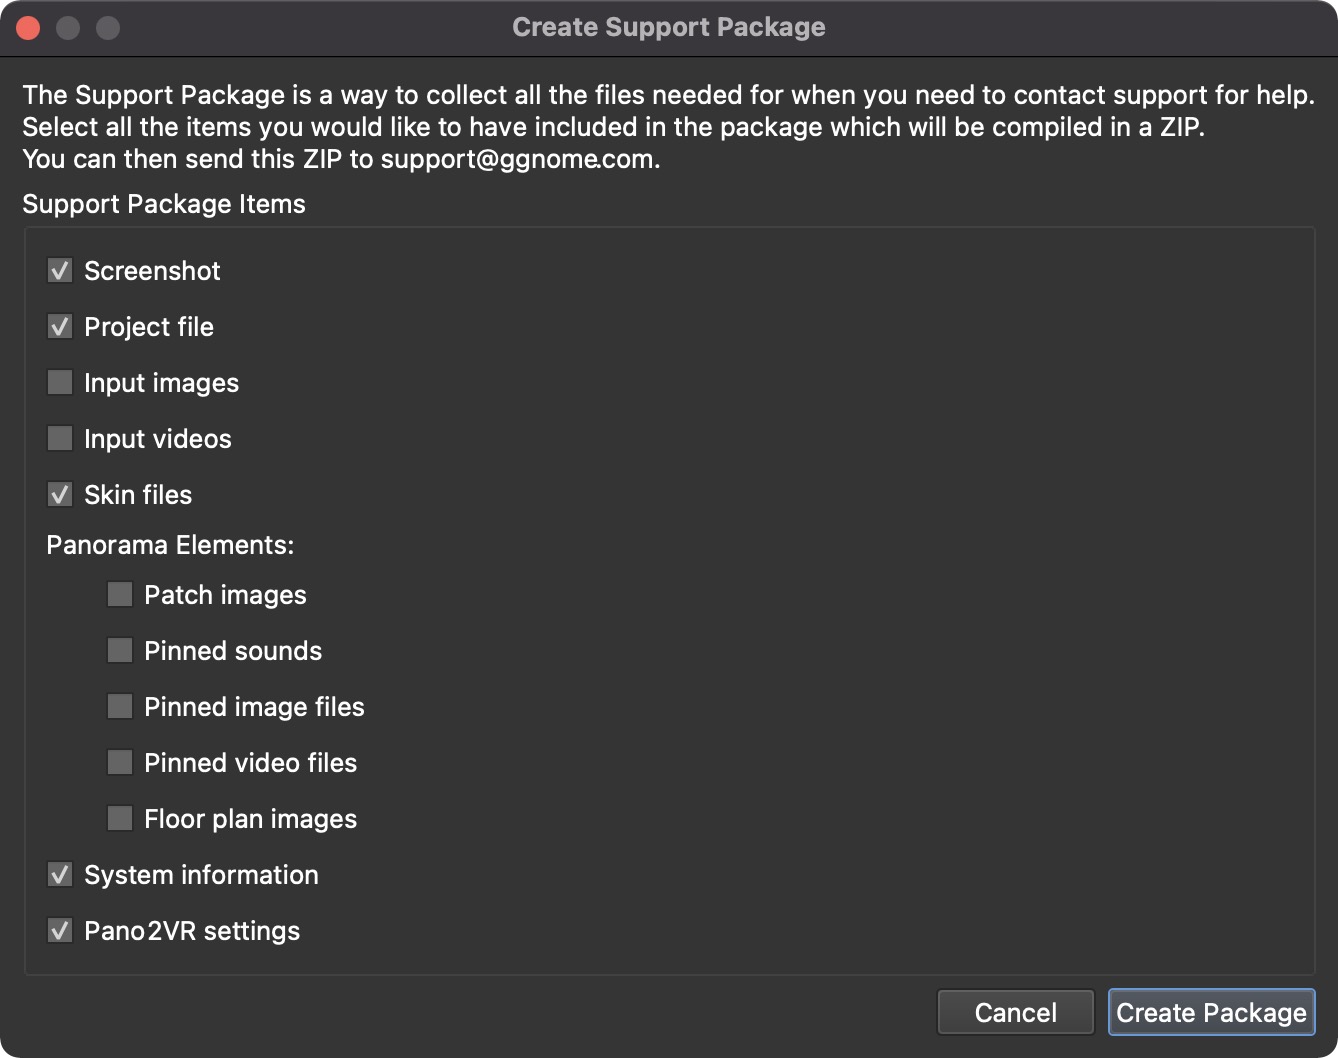 Support Package Dialog